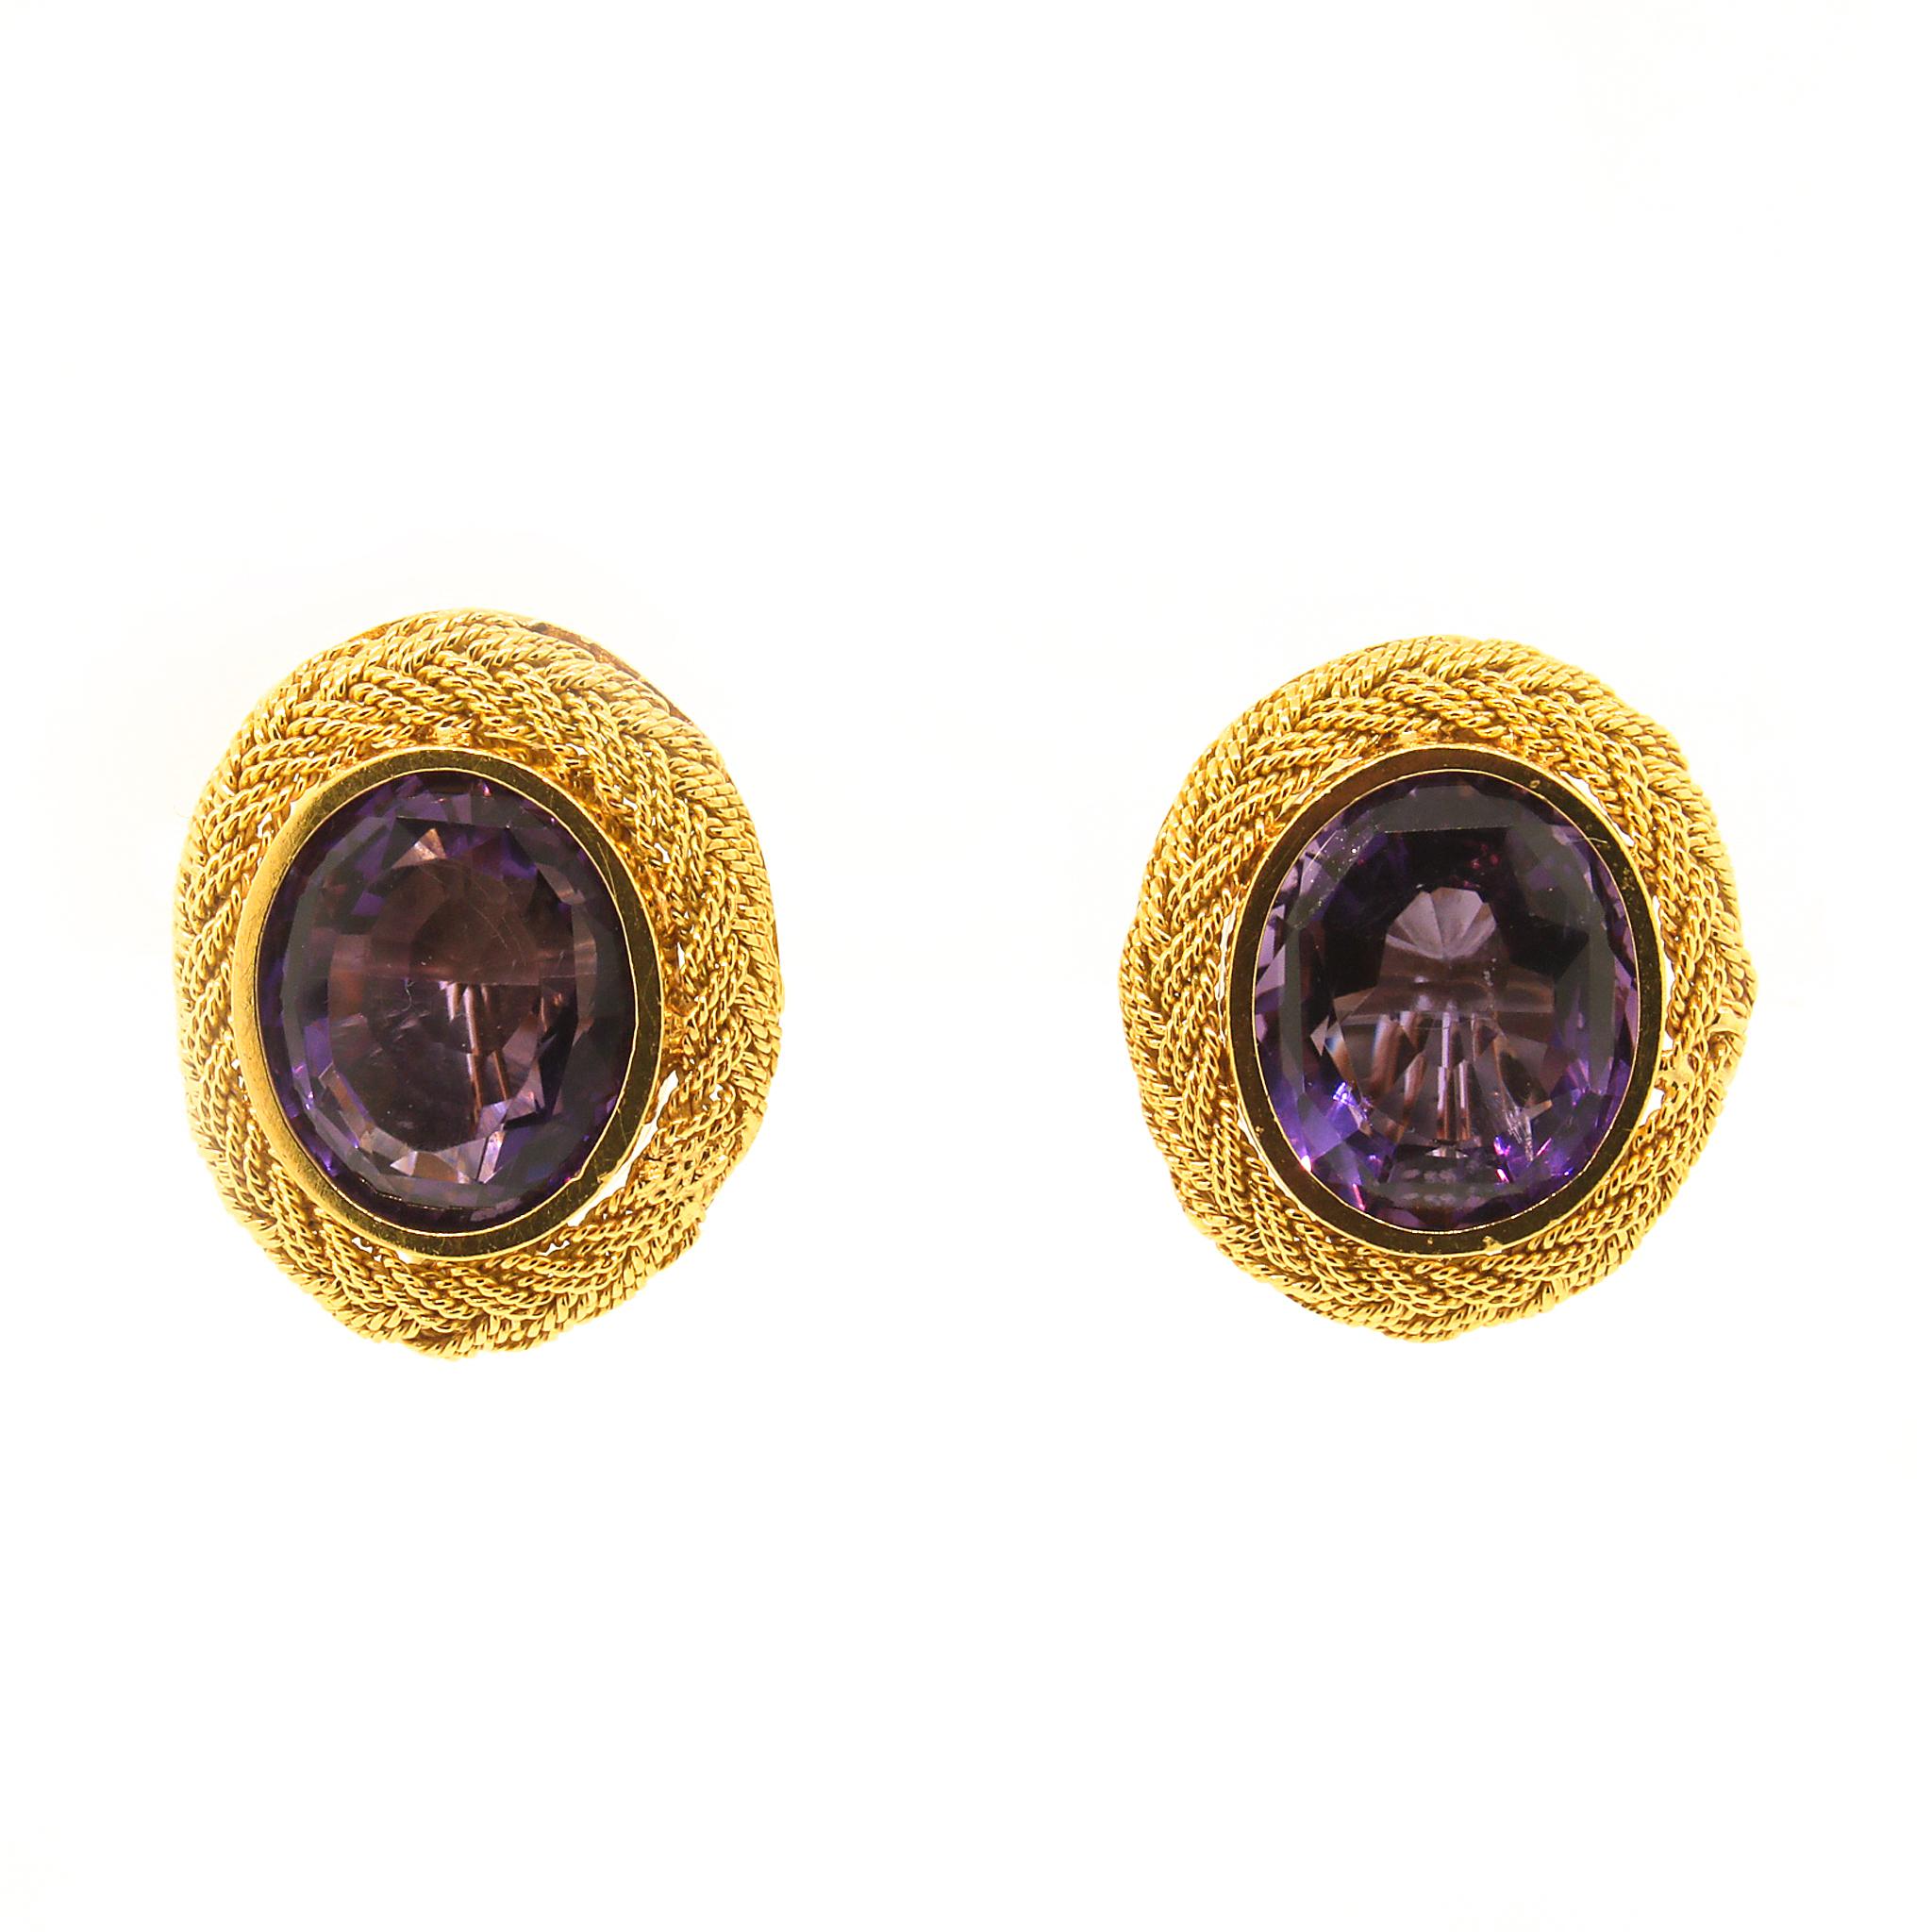 18 kt Yellow Gold and Platinum
Total Weight: 14.1 grams
Measurement: 22x18mm
Amethyst: 13 tcw (estimated)